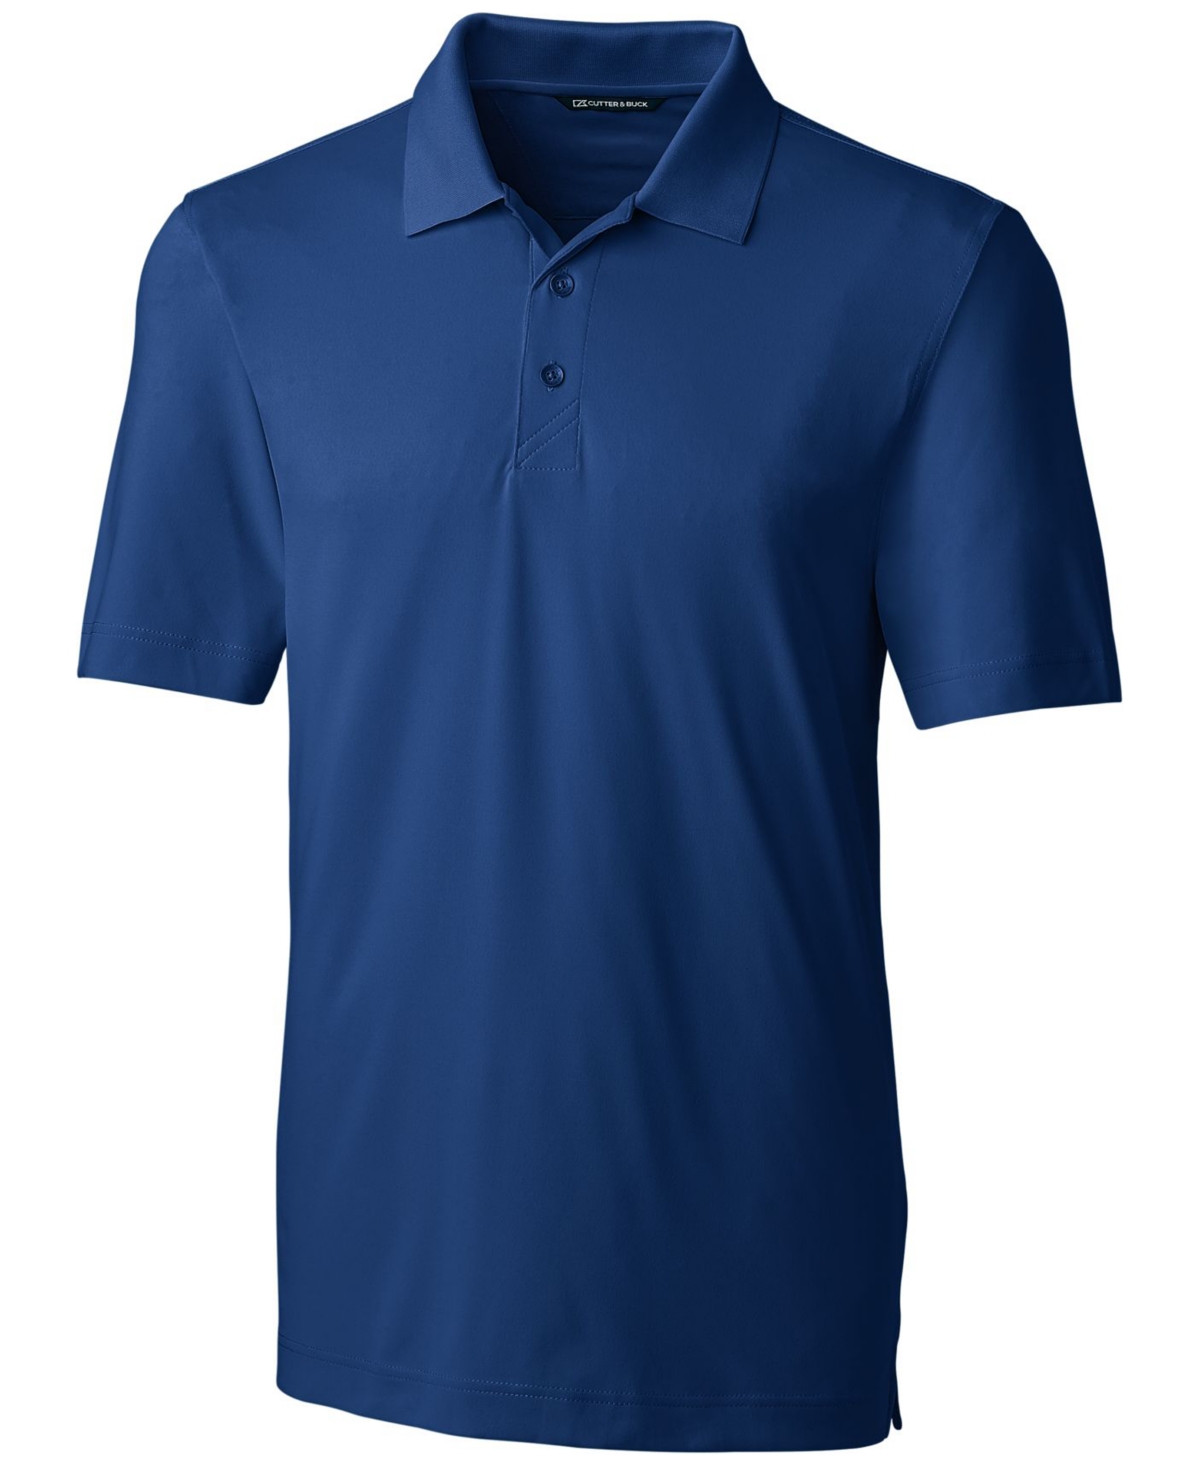 Forge Stretch Men's Tall Polo Shirt - Polished